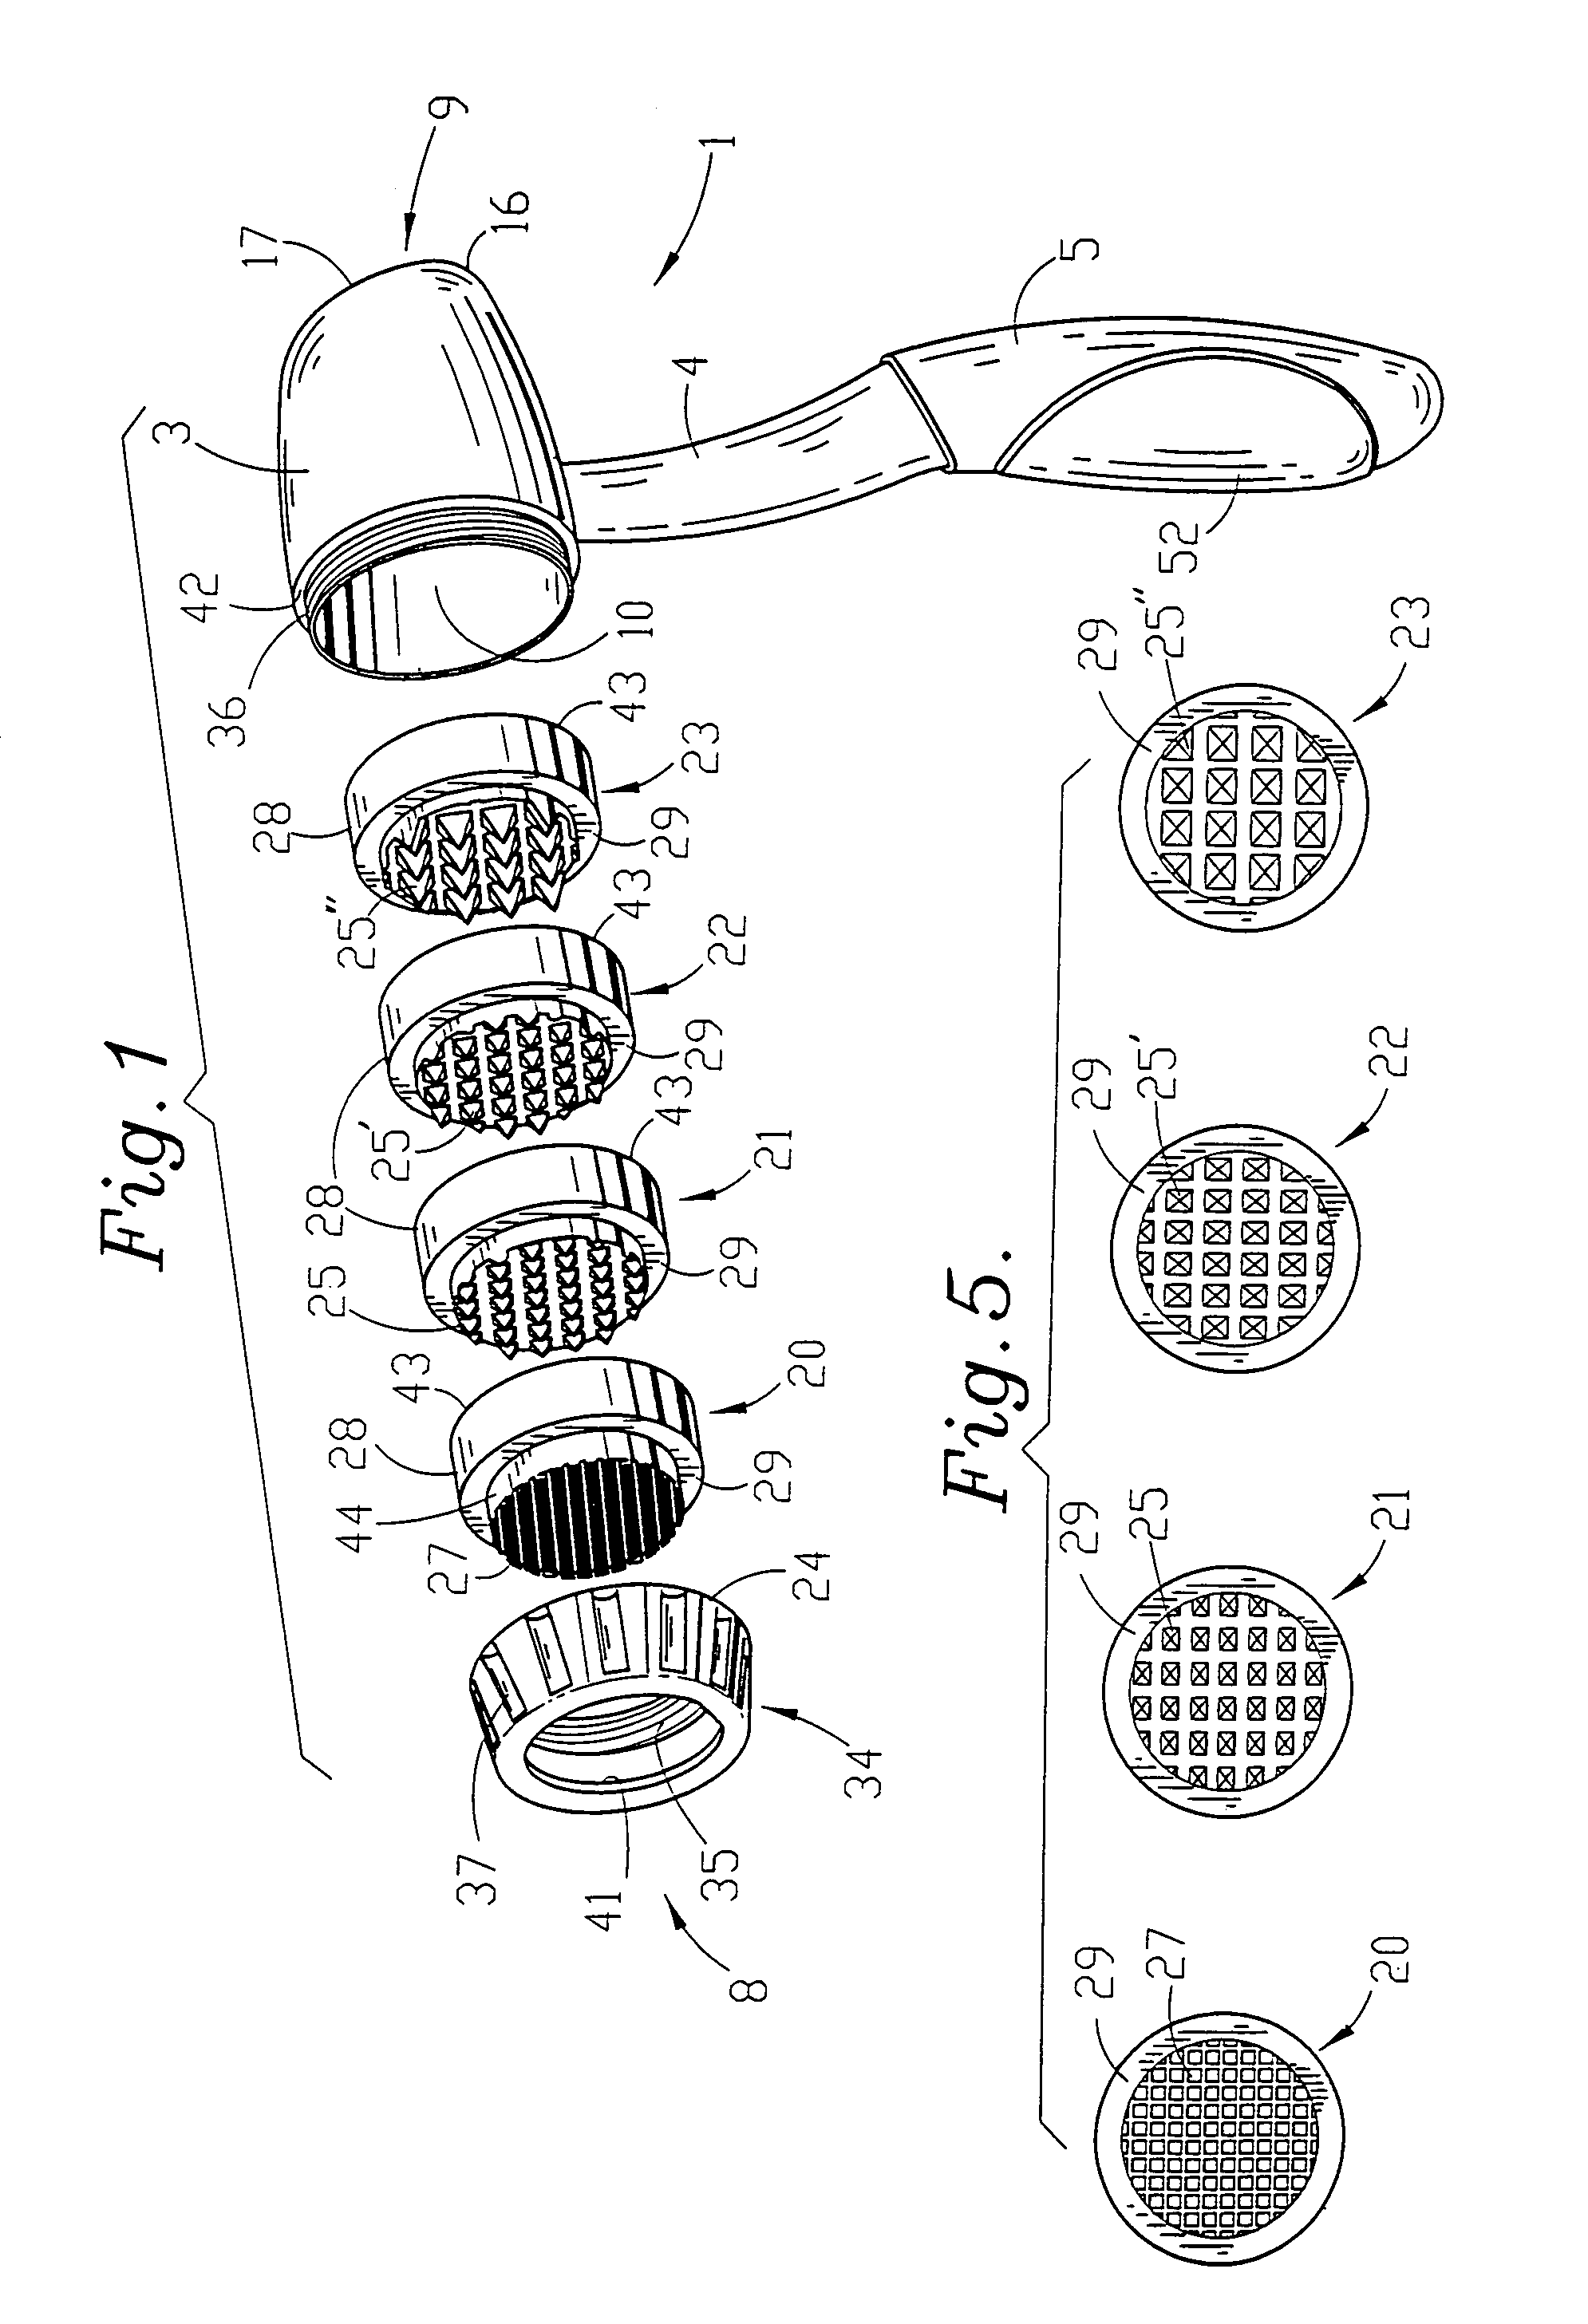 Meat mallet with interchangeable tenderizing surfaces